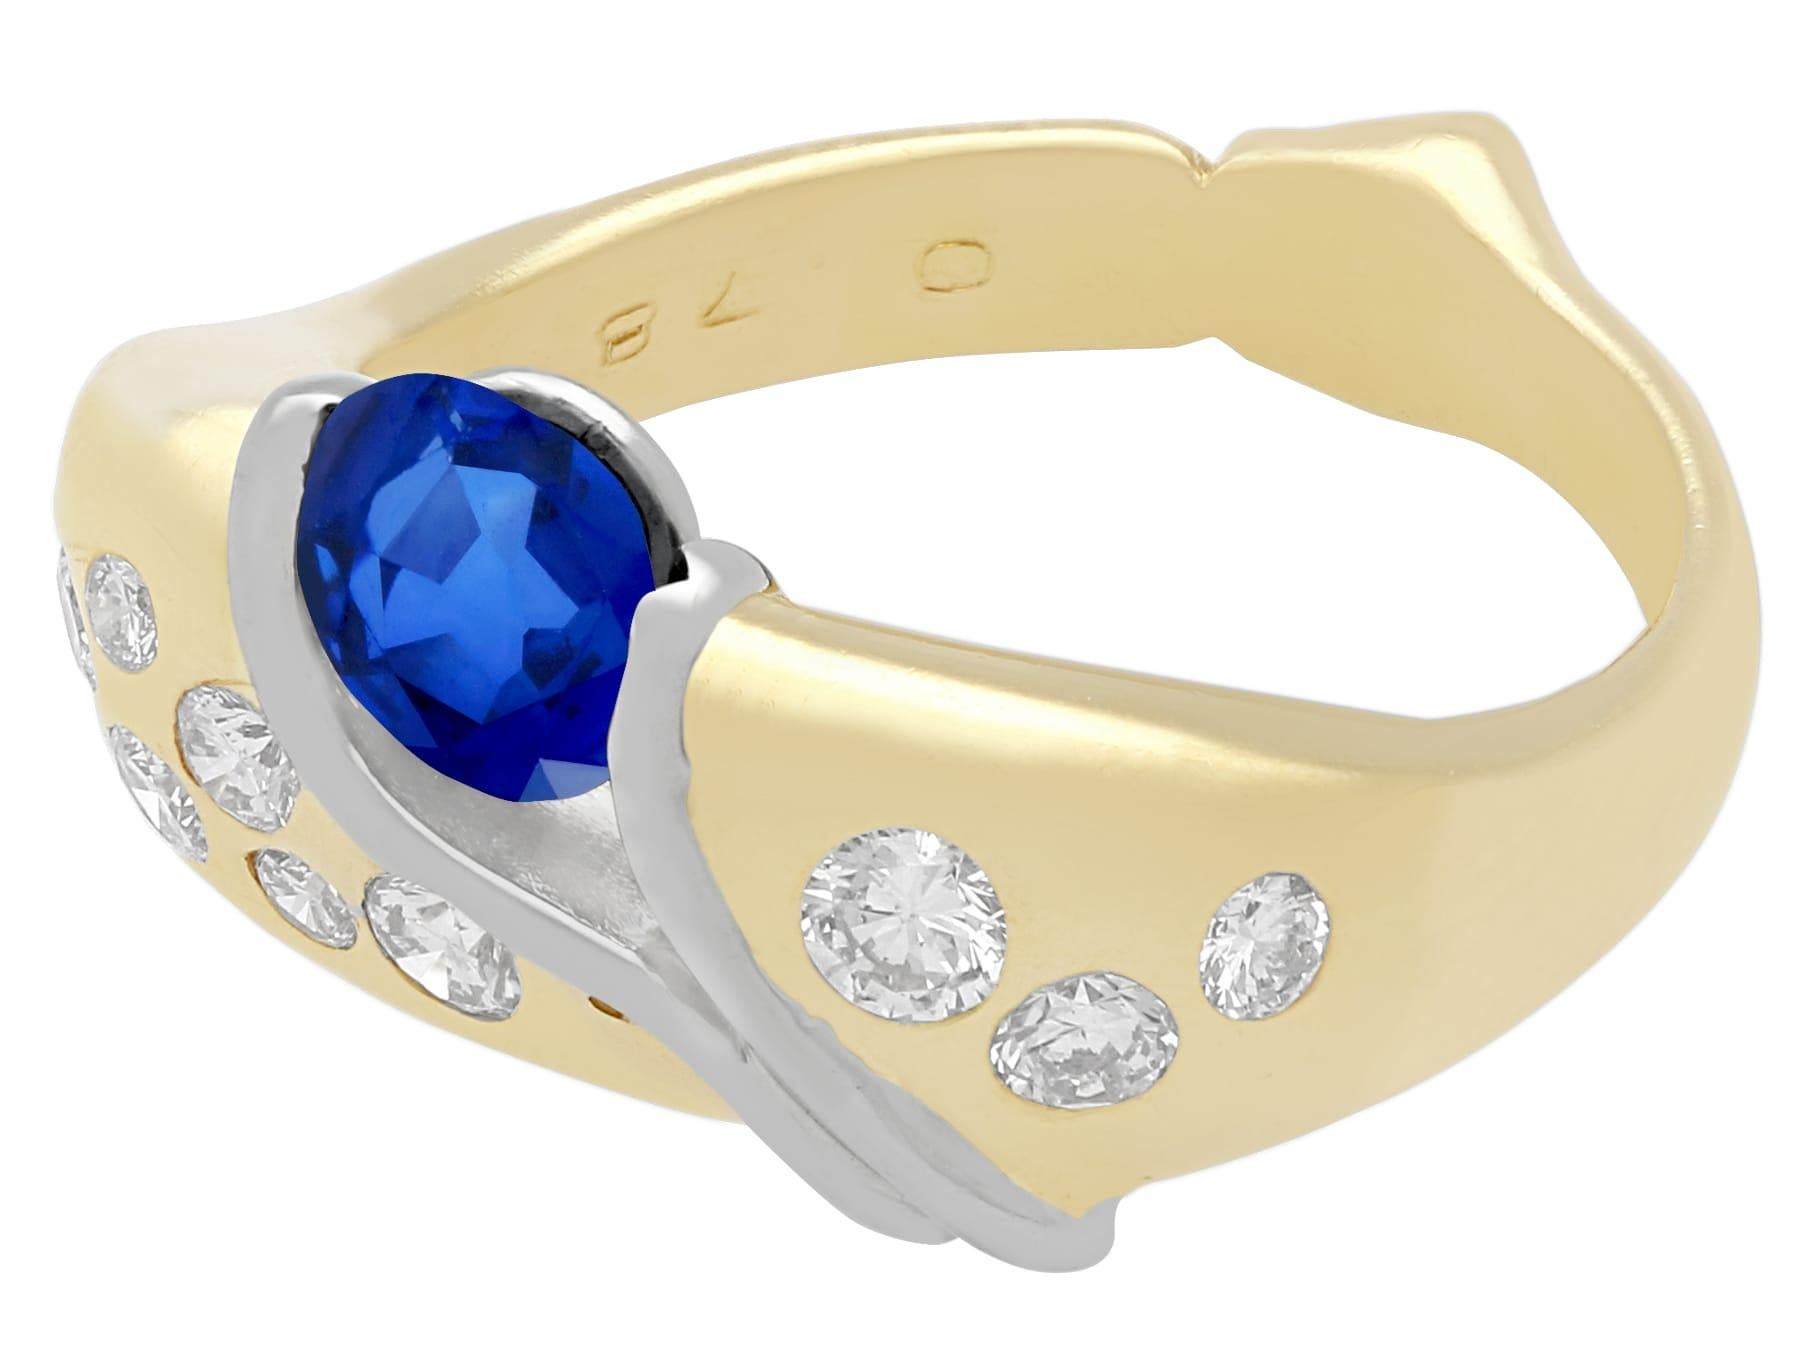 An impressive vintage 0.97 carat sapphire and 0.48 carat diamond, 18 karat yellow and white gold cocktail ring; part of our diverse vintage jewelry and estate jewelry collections

This fine and impressive sapphire and diamond band ring has been